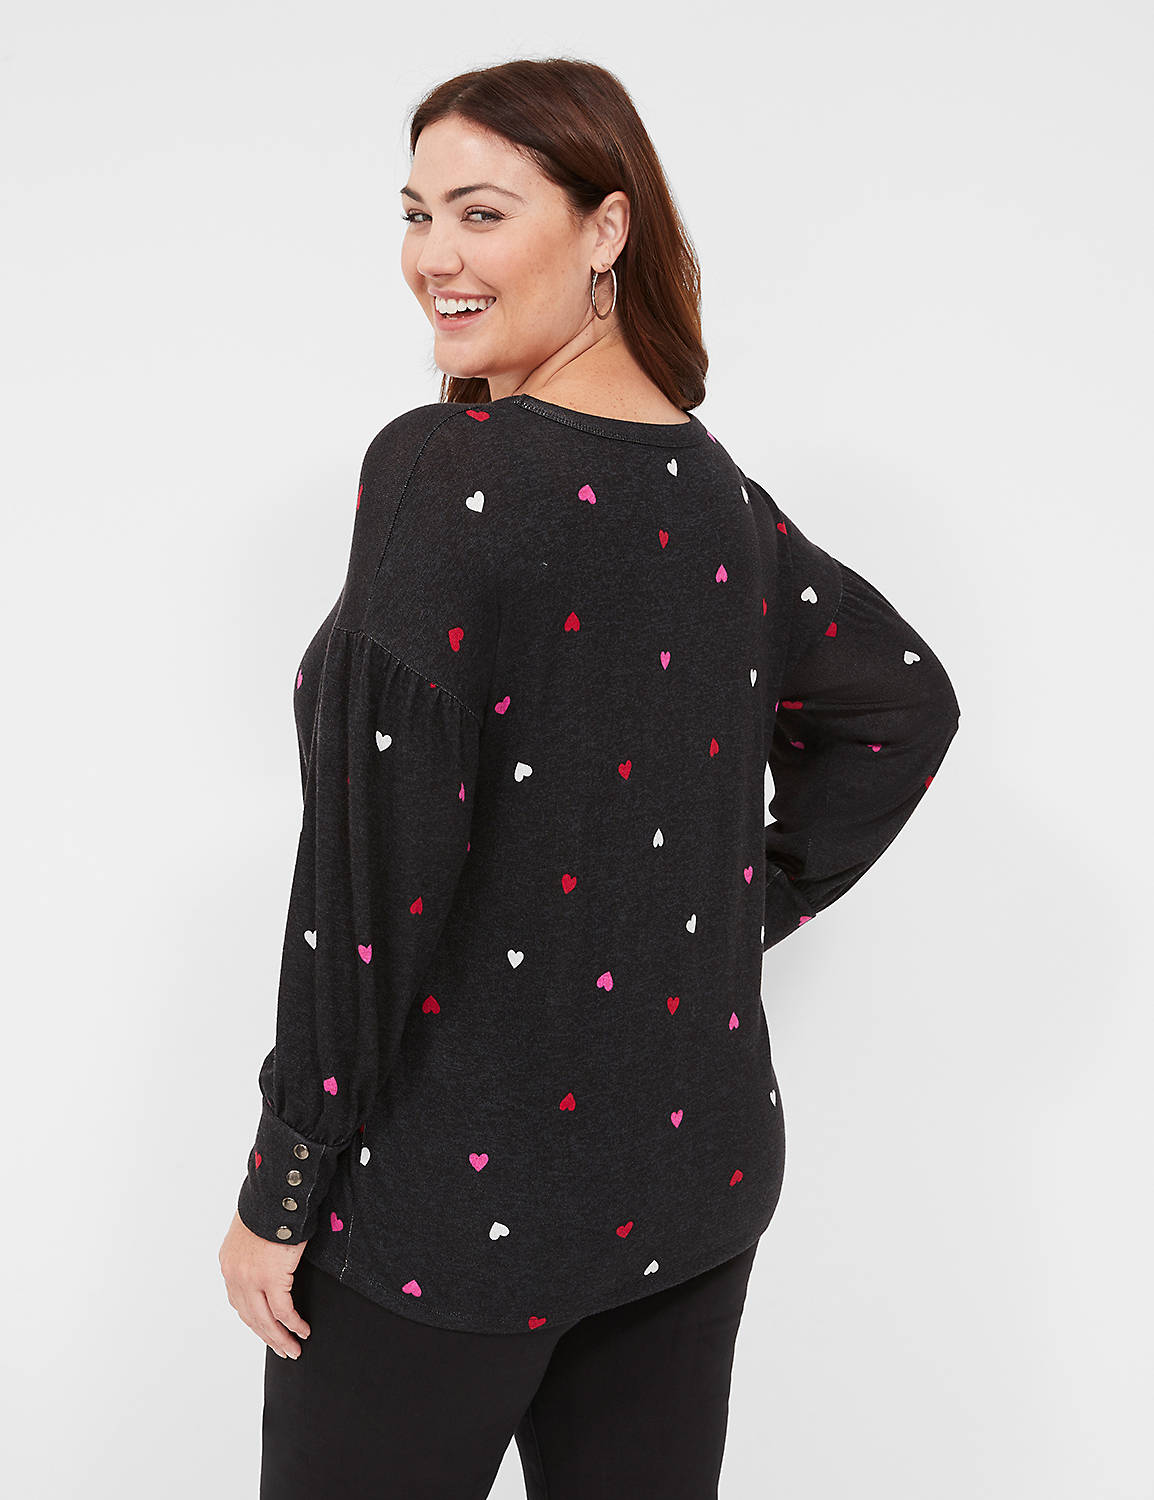 Relaxed Long Sleeve Scoop Neck Swea Product Image 2